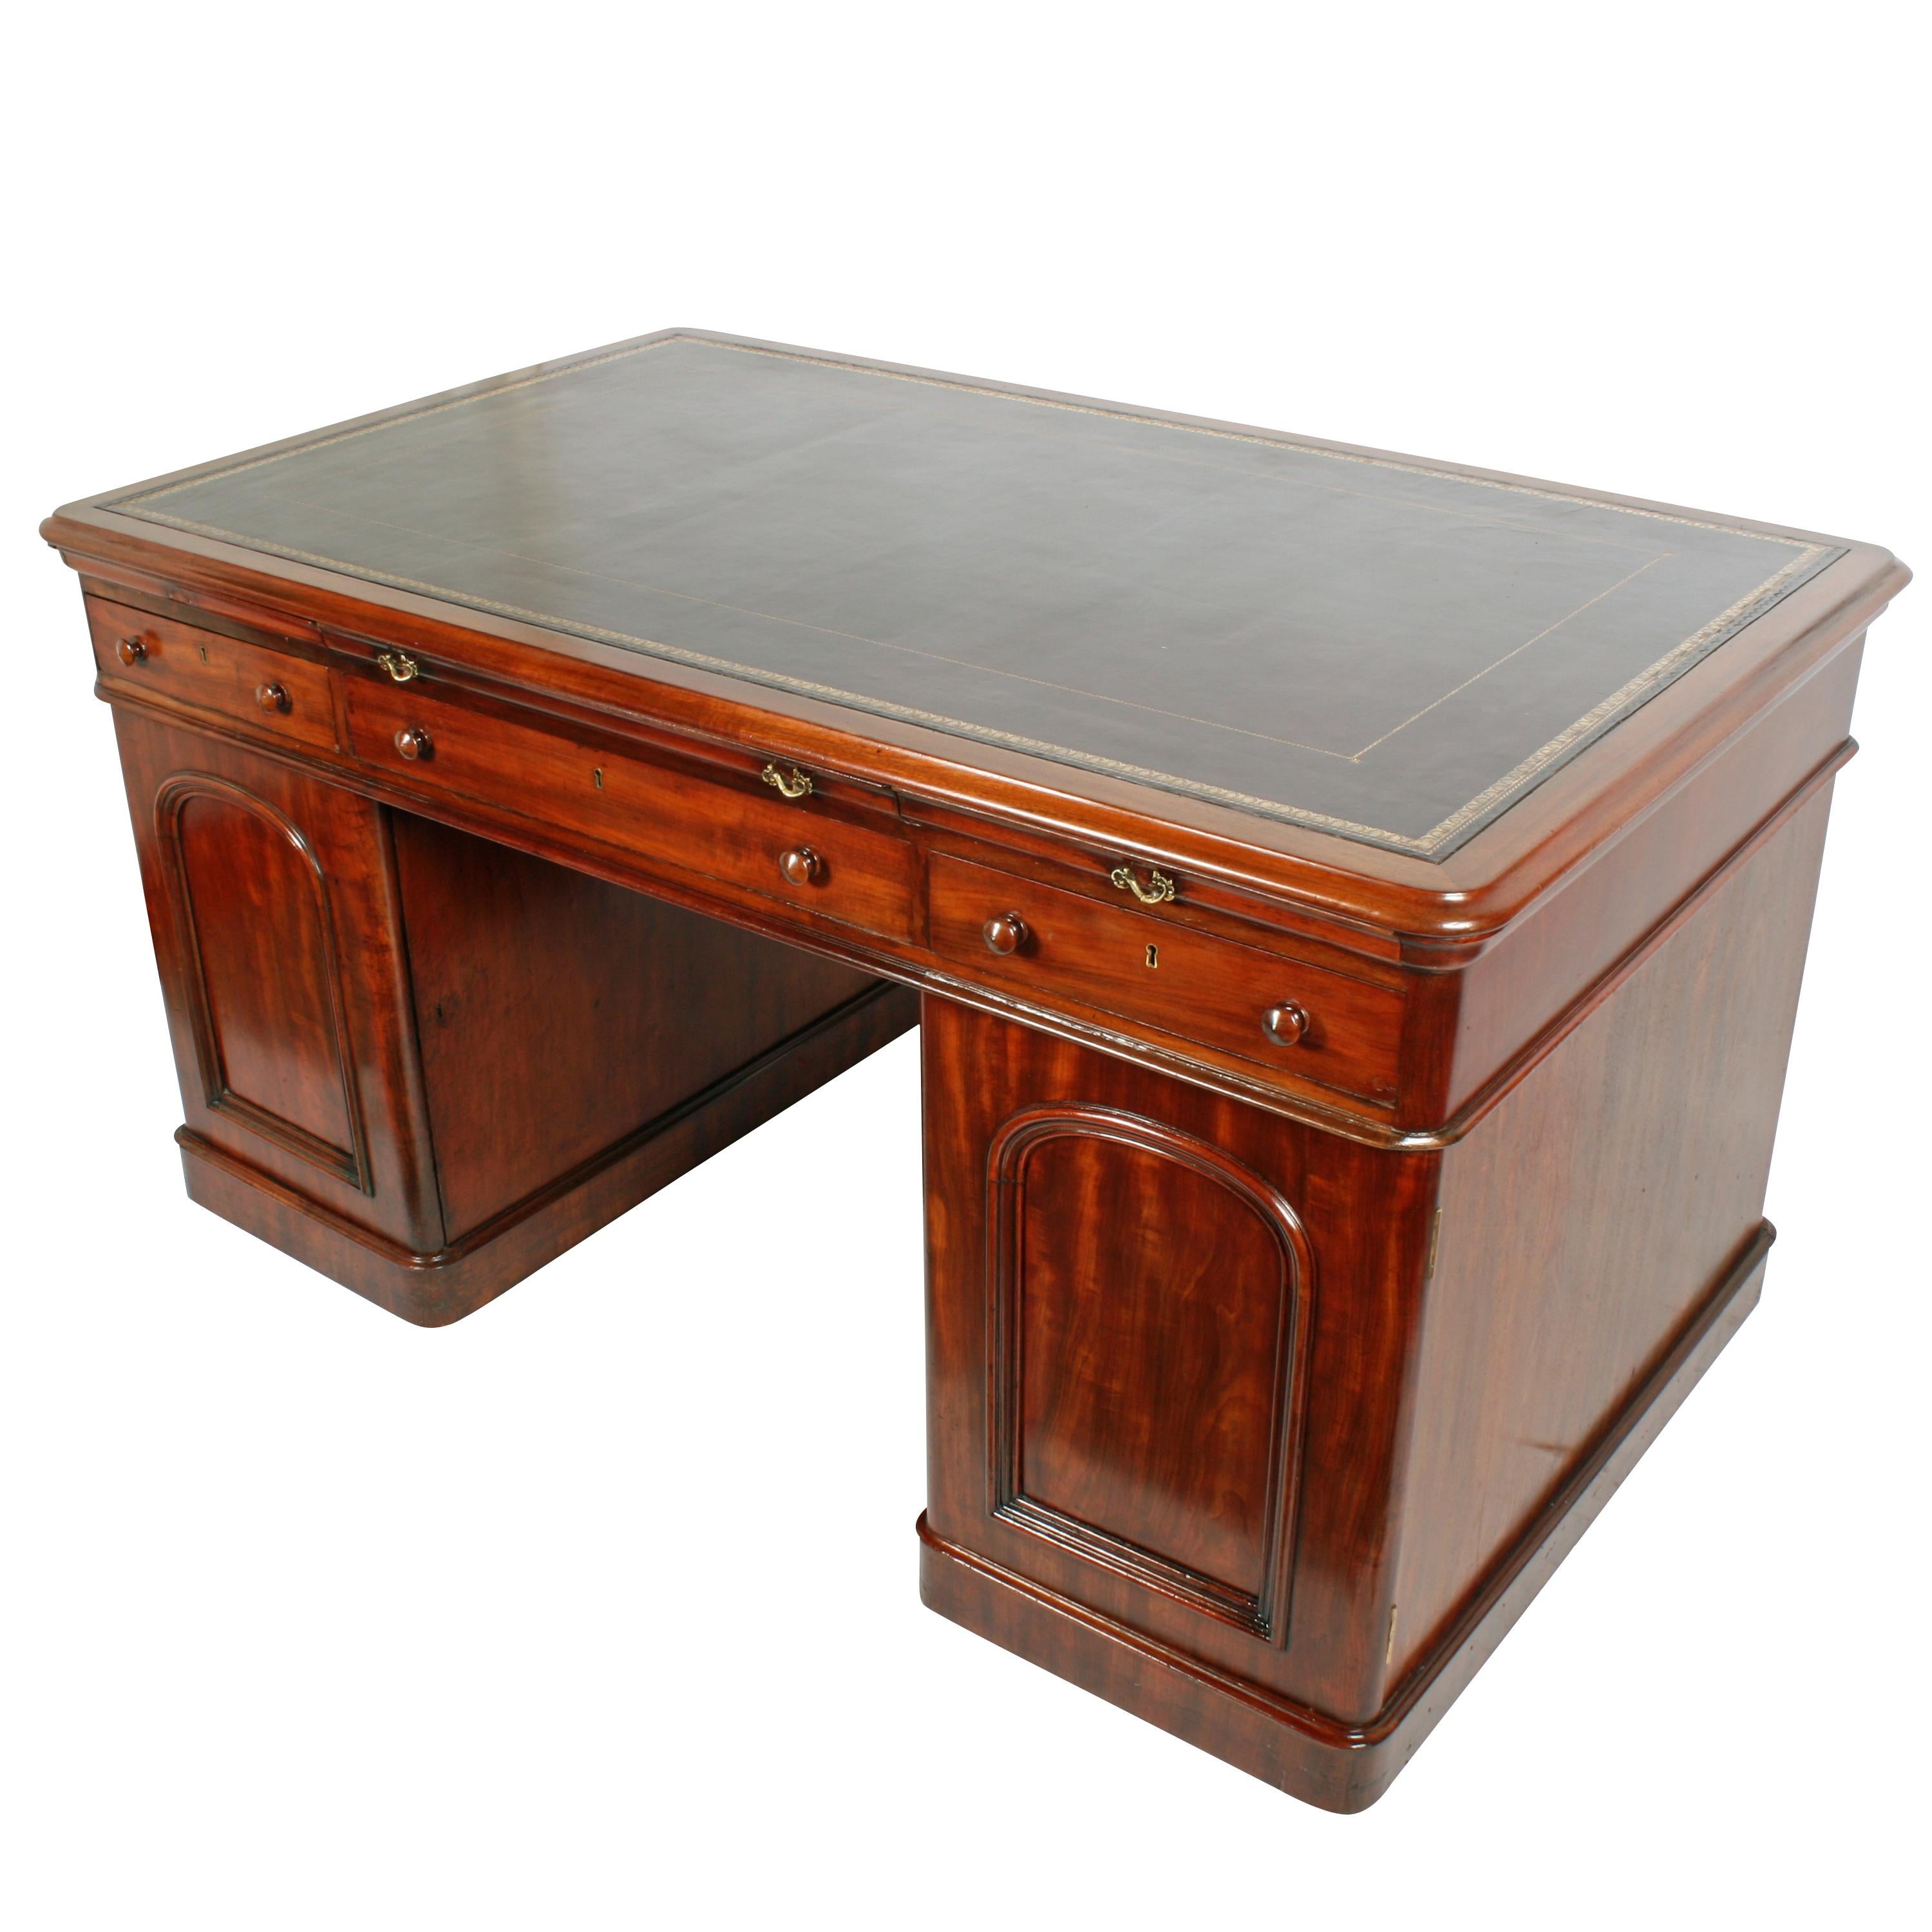 Victorian mahogany partner's desk


A 19th century Victorian mahogany partner's desk.

The desk has nine ashwood lined drawers to one side and three drawers and two cupboards to the other side.

The side with the nine drawers has a pull-out